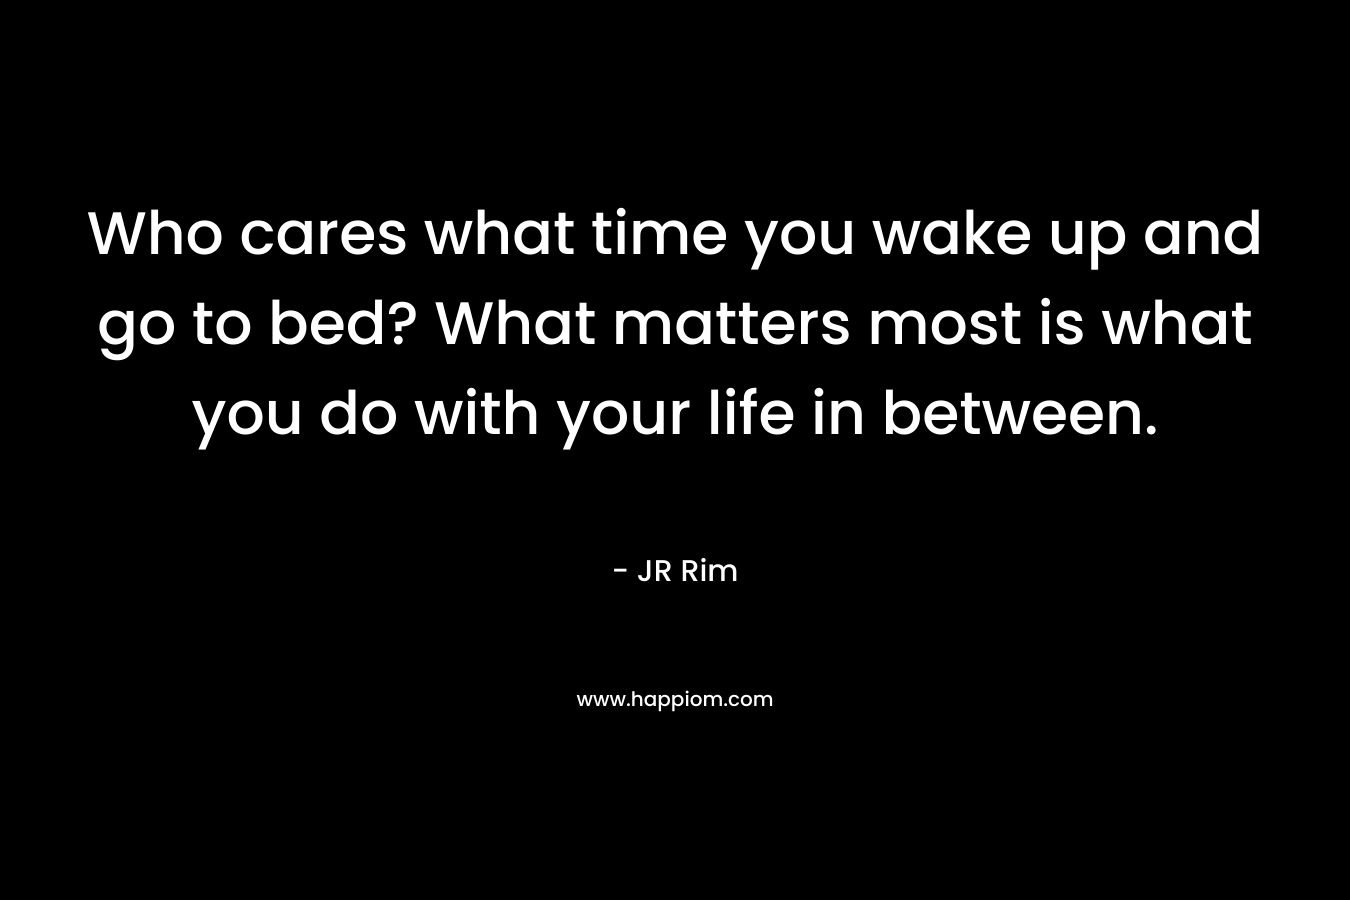 Who cares what time you wake up and go to bed? What matters most is what you do with your life in between. – JR Rim